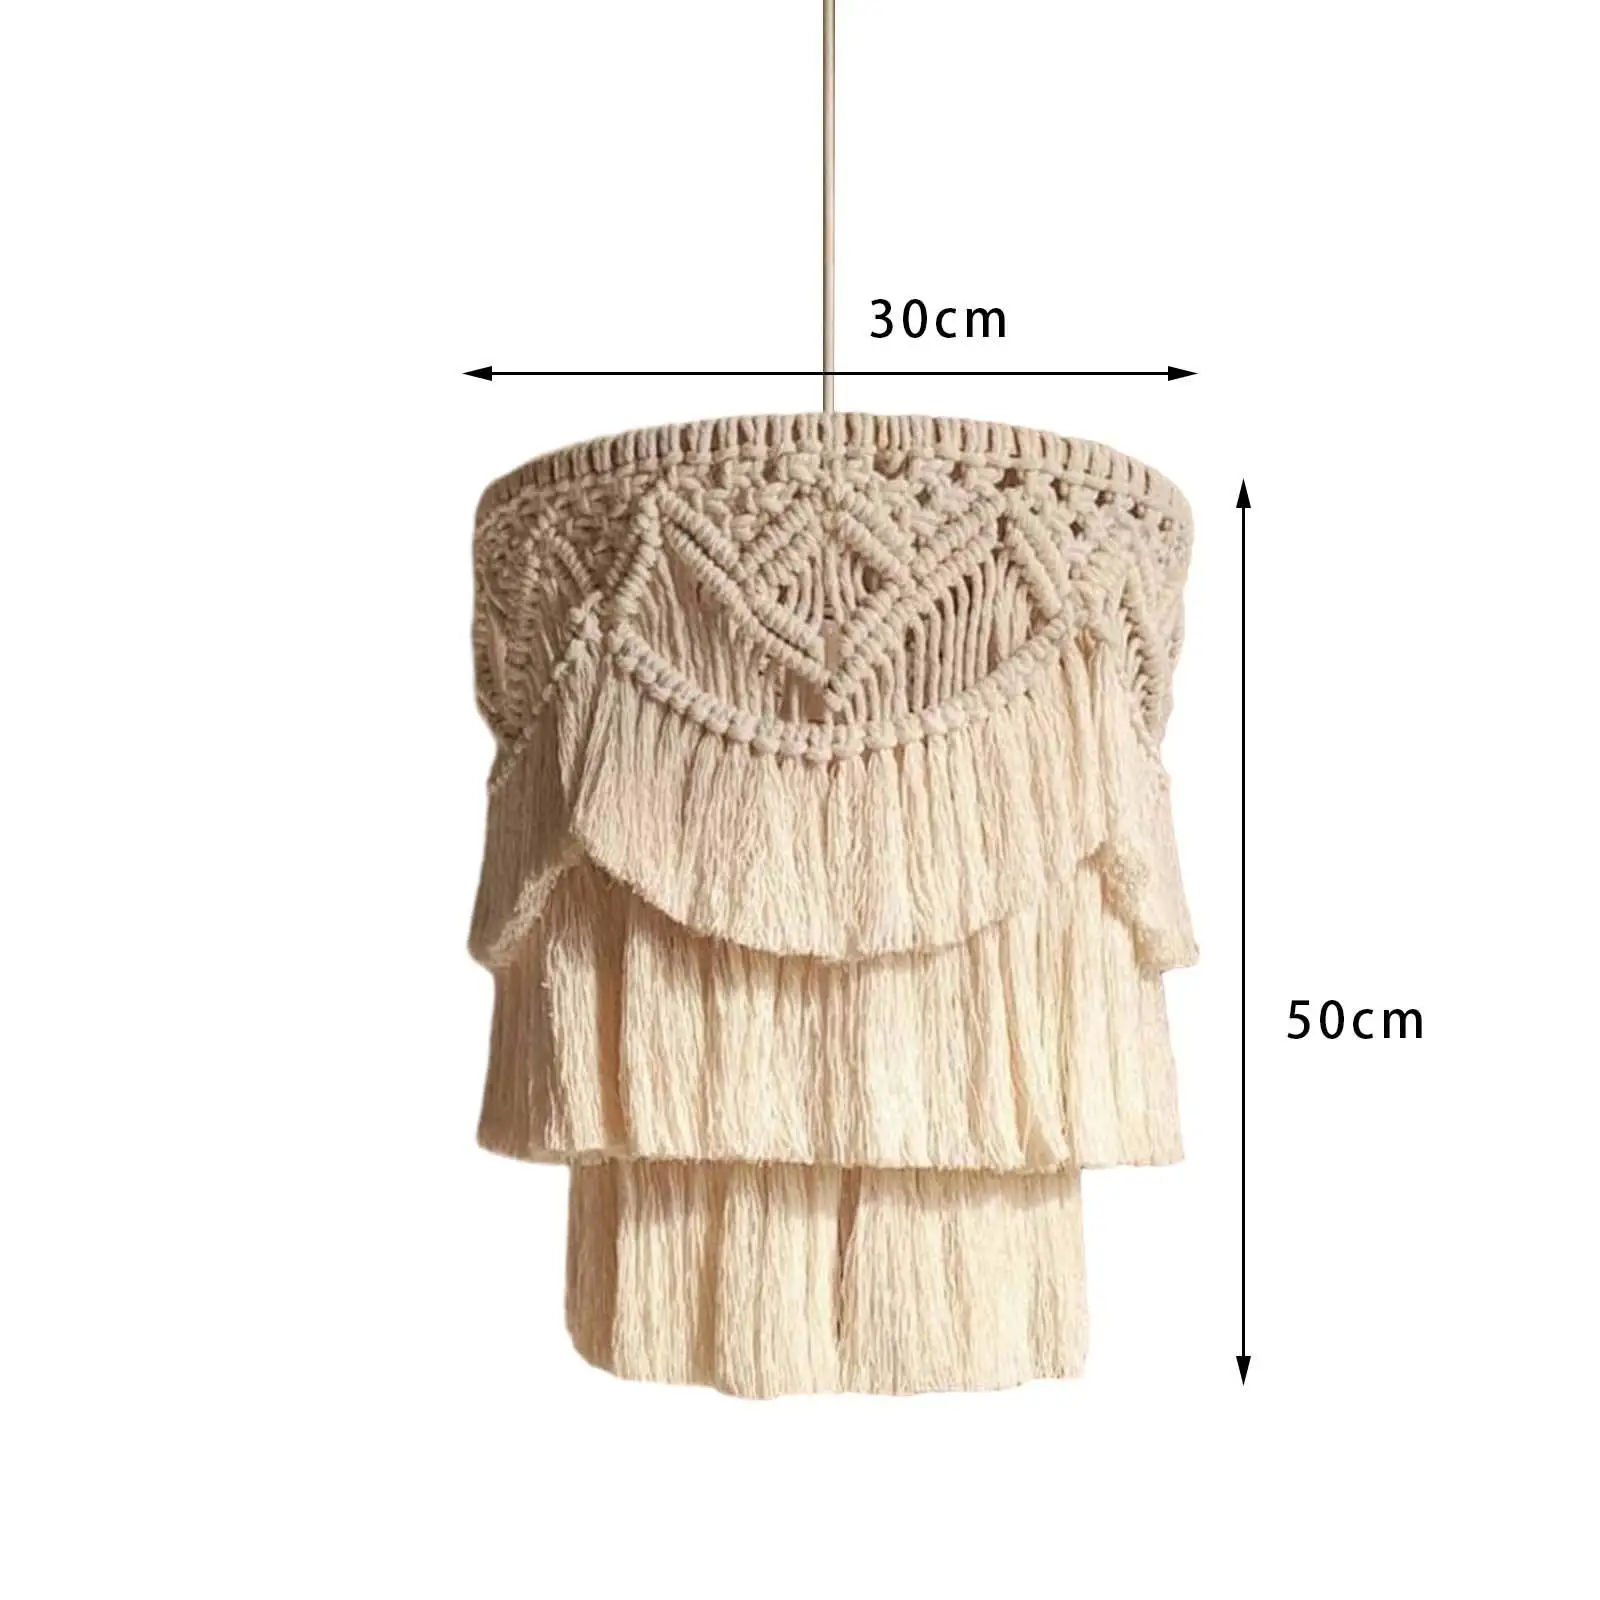 Macrame Lamp Shade Handwoven Durable Rustic Pendant Light Cover for Housewarming Gift Apartment Dining Room Office Restaurant